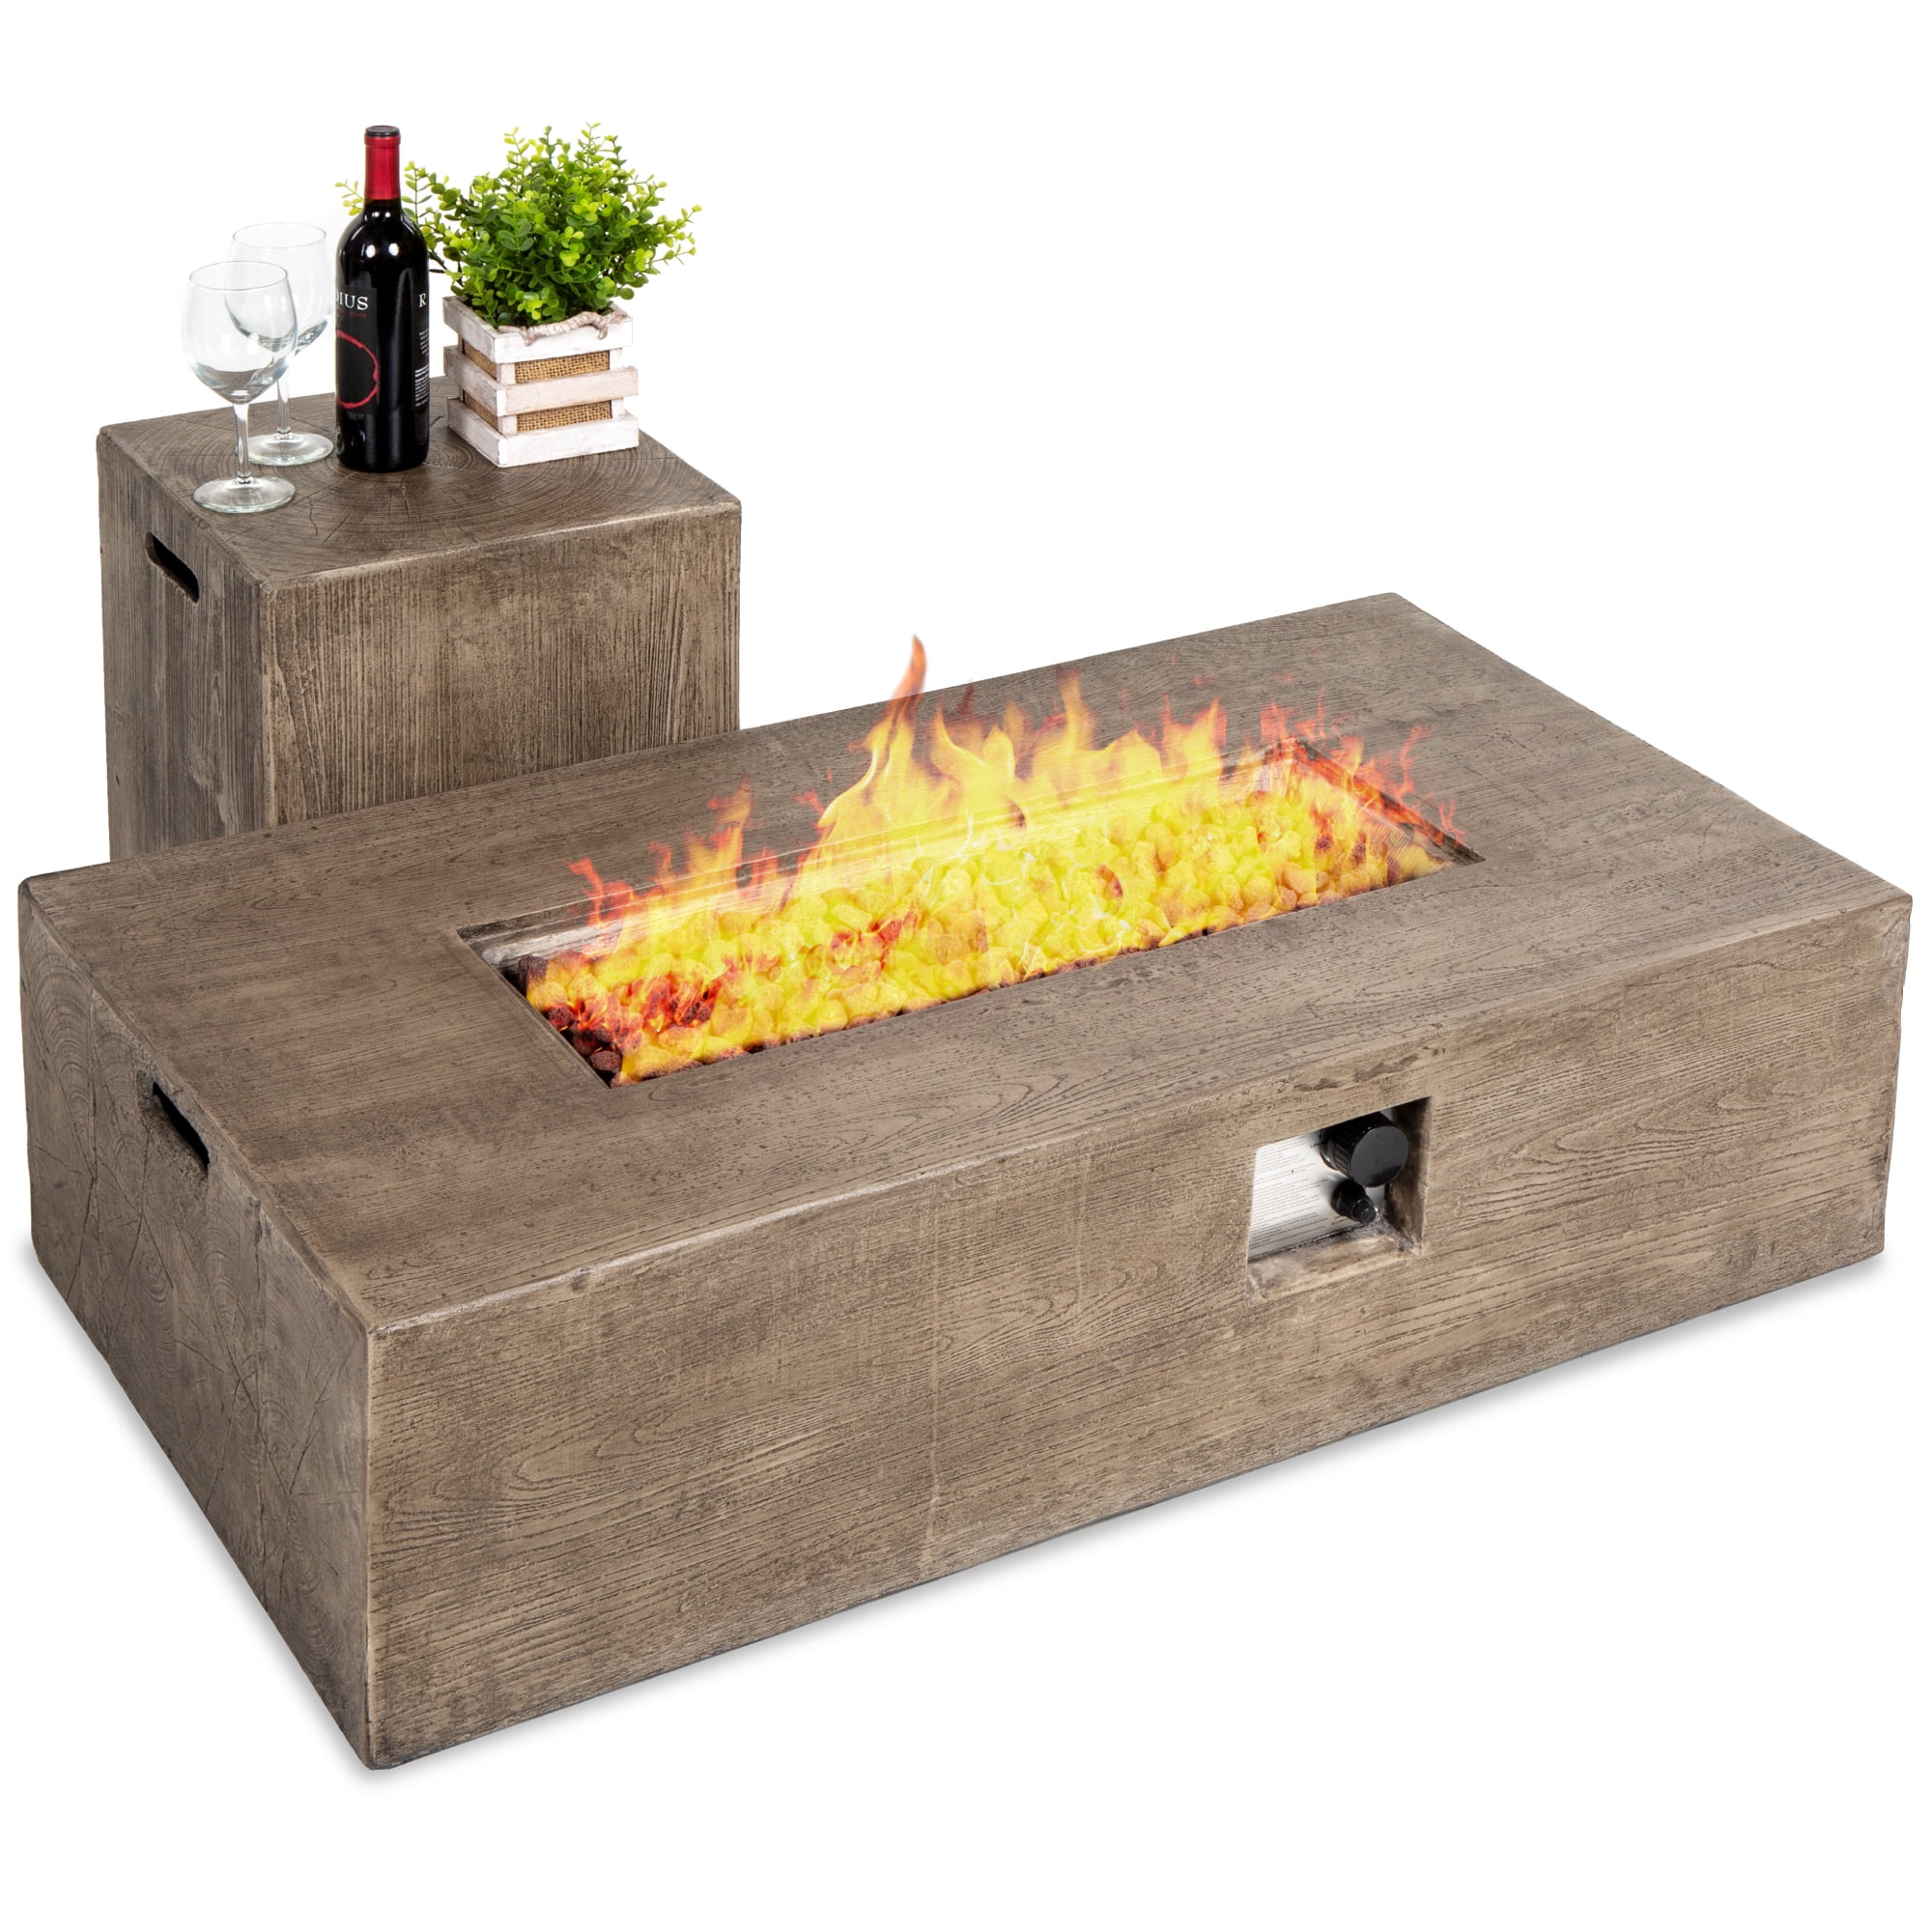 Hiland Decorative Fire Pit Hammered, S&S Fire Pits